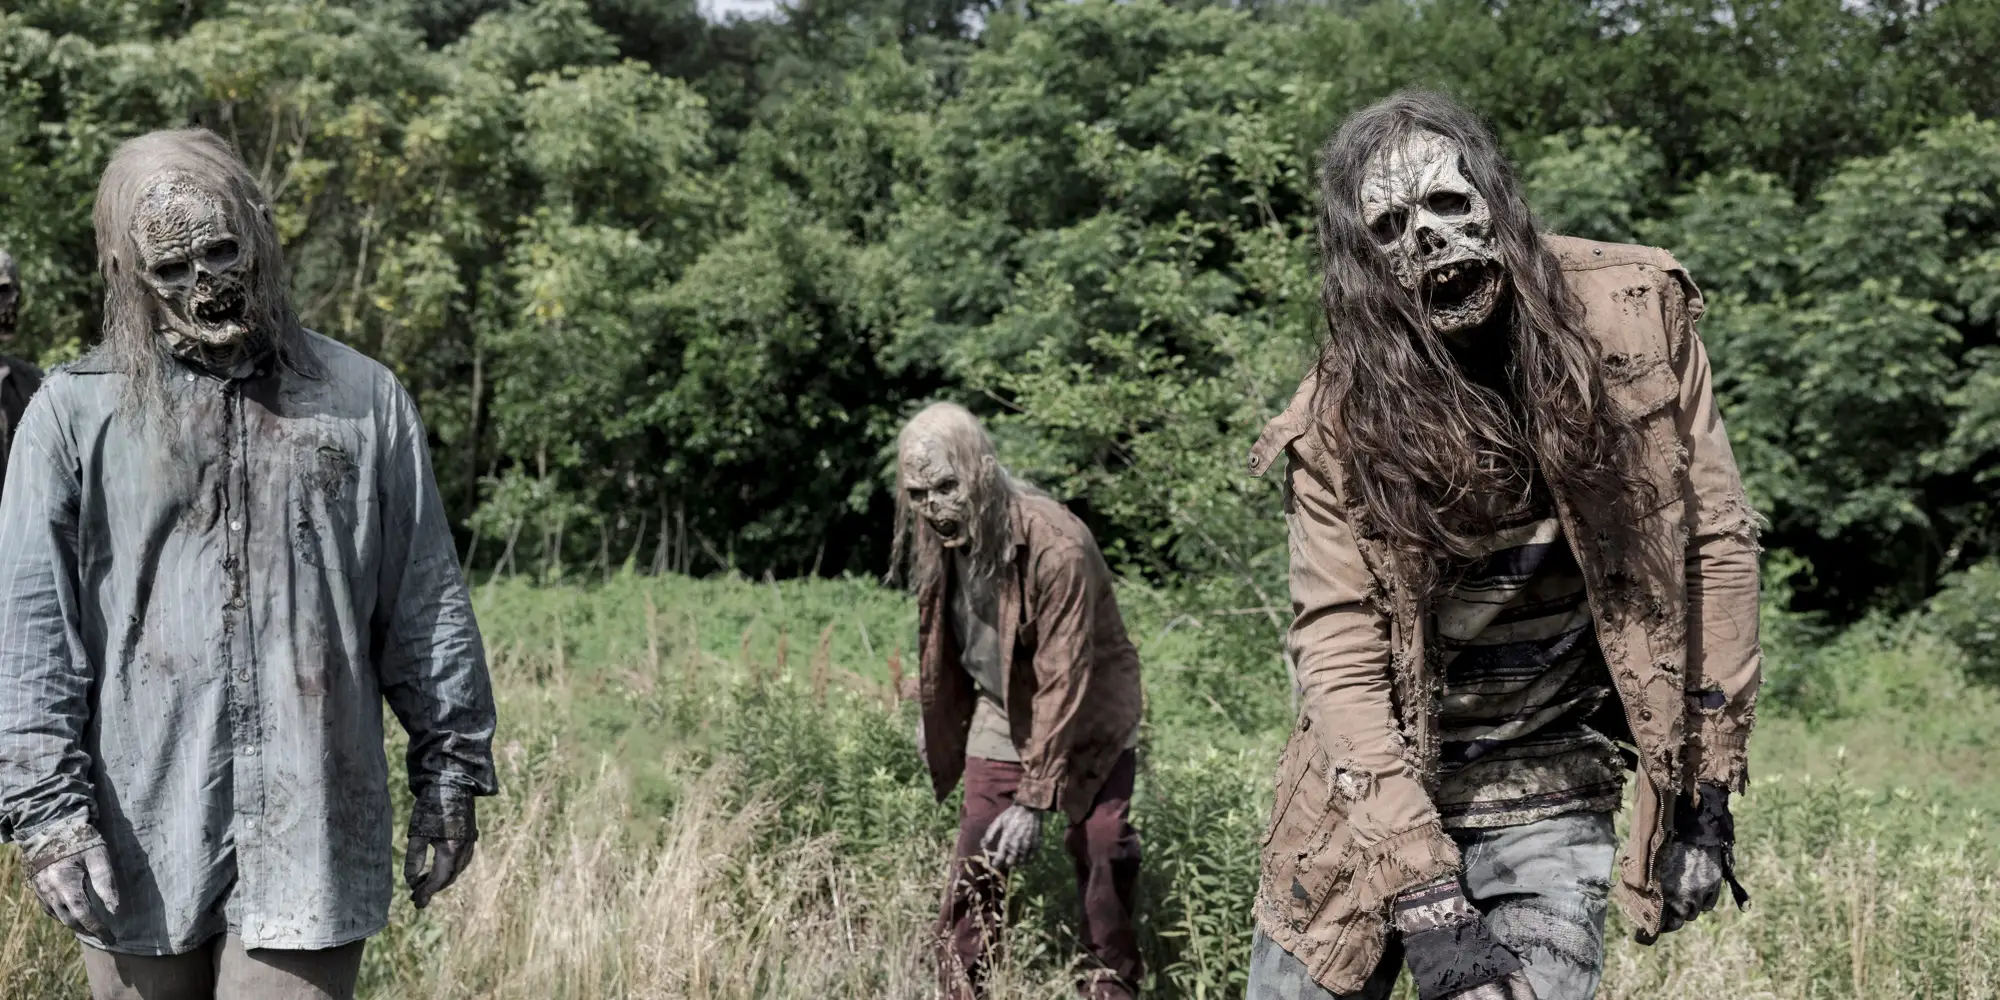 resources The new walking dead: Over 1,000 venture funds were formed in the past 4 years. Now many could turn into zombies as LP fundraising dries up.